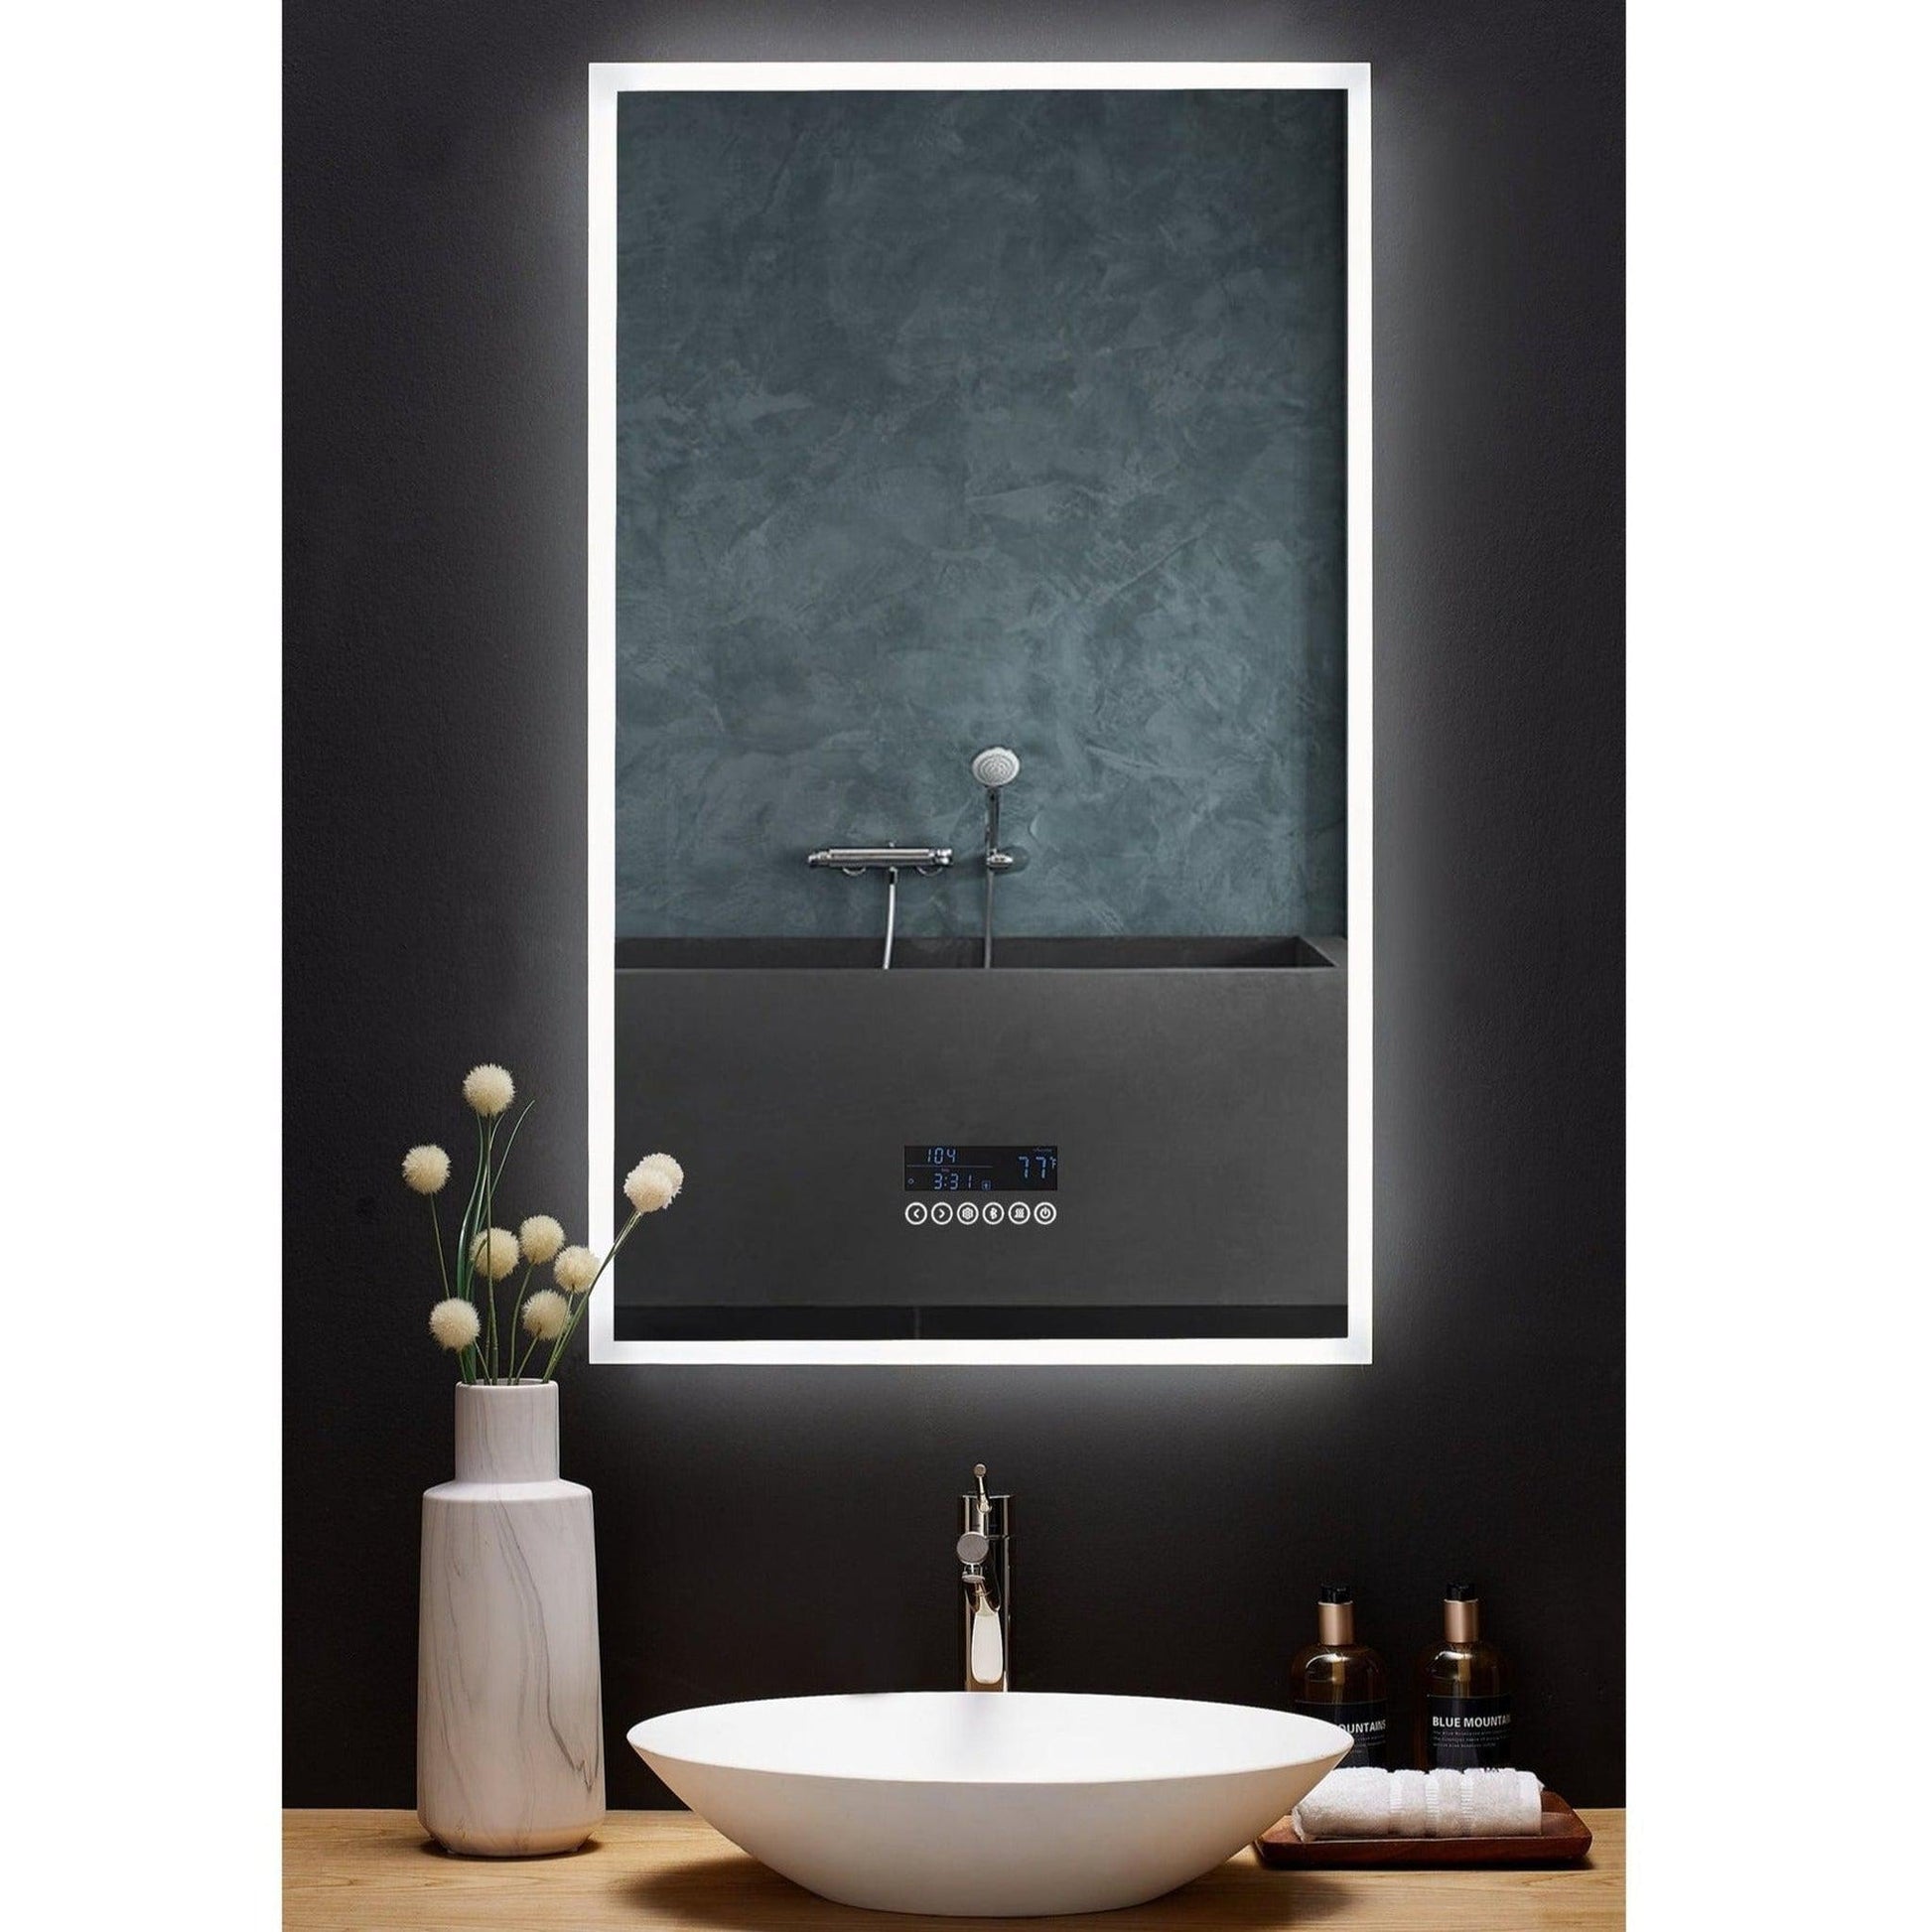 Ancerre Designs Immersion 24" x 40" Modern Rectangle LED Lighted Frameless Bathroom Vanity Mirror With Bluetooth, Defogger, Digital Display and Mounting Hardware